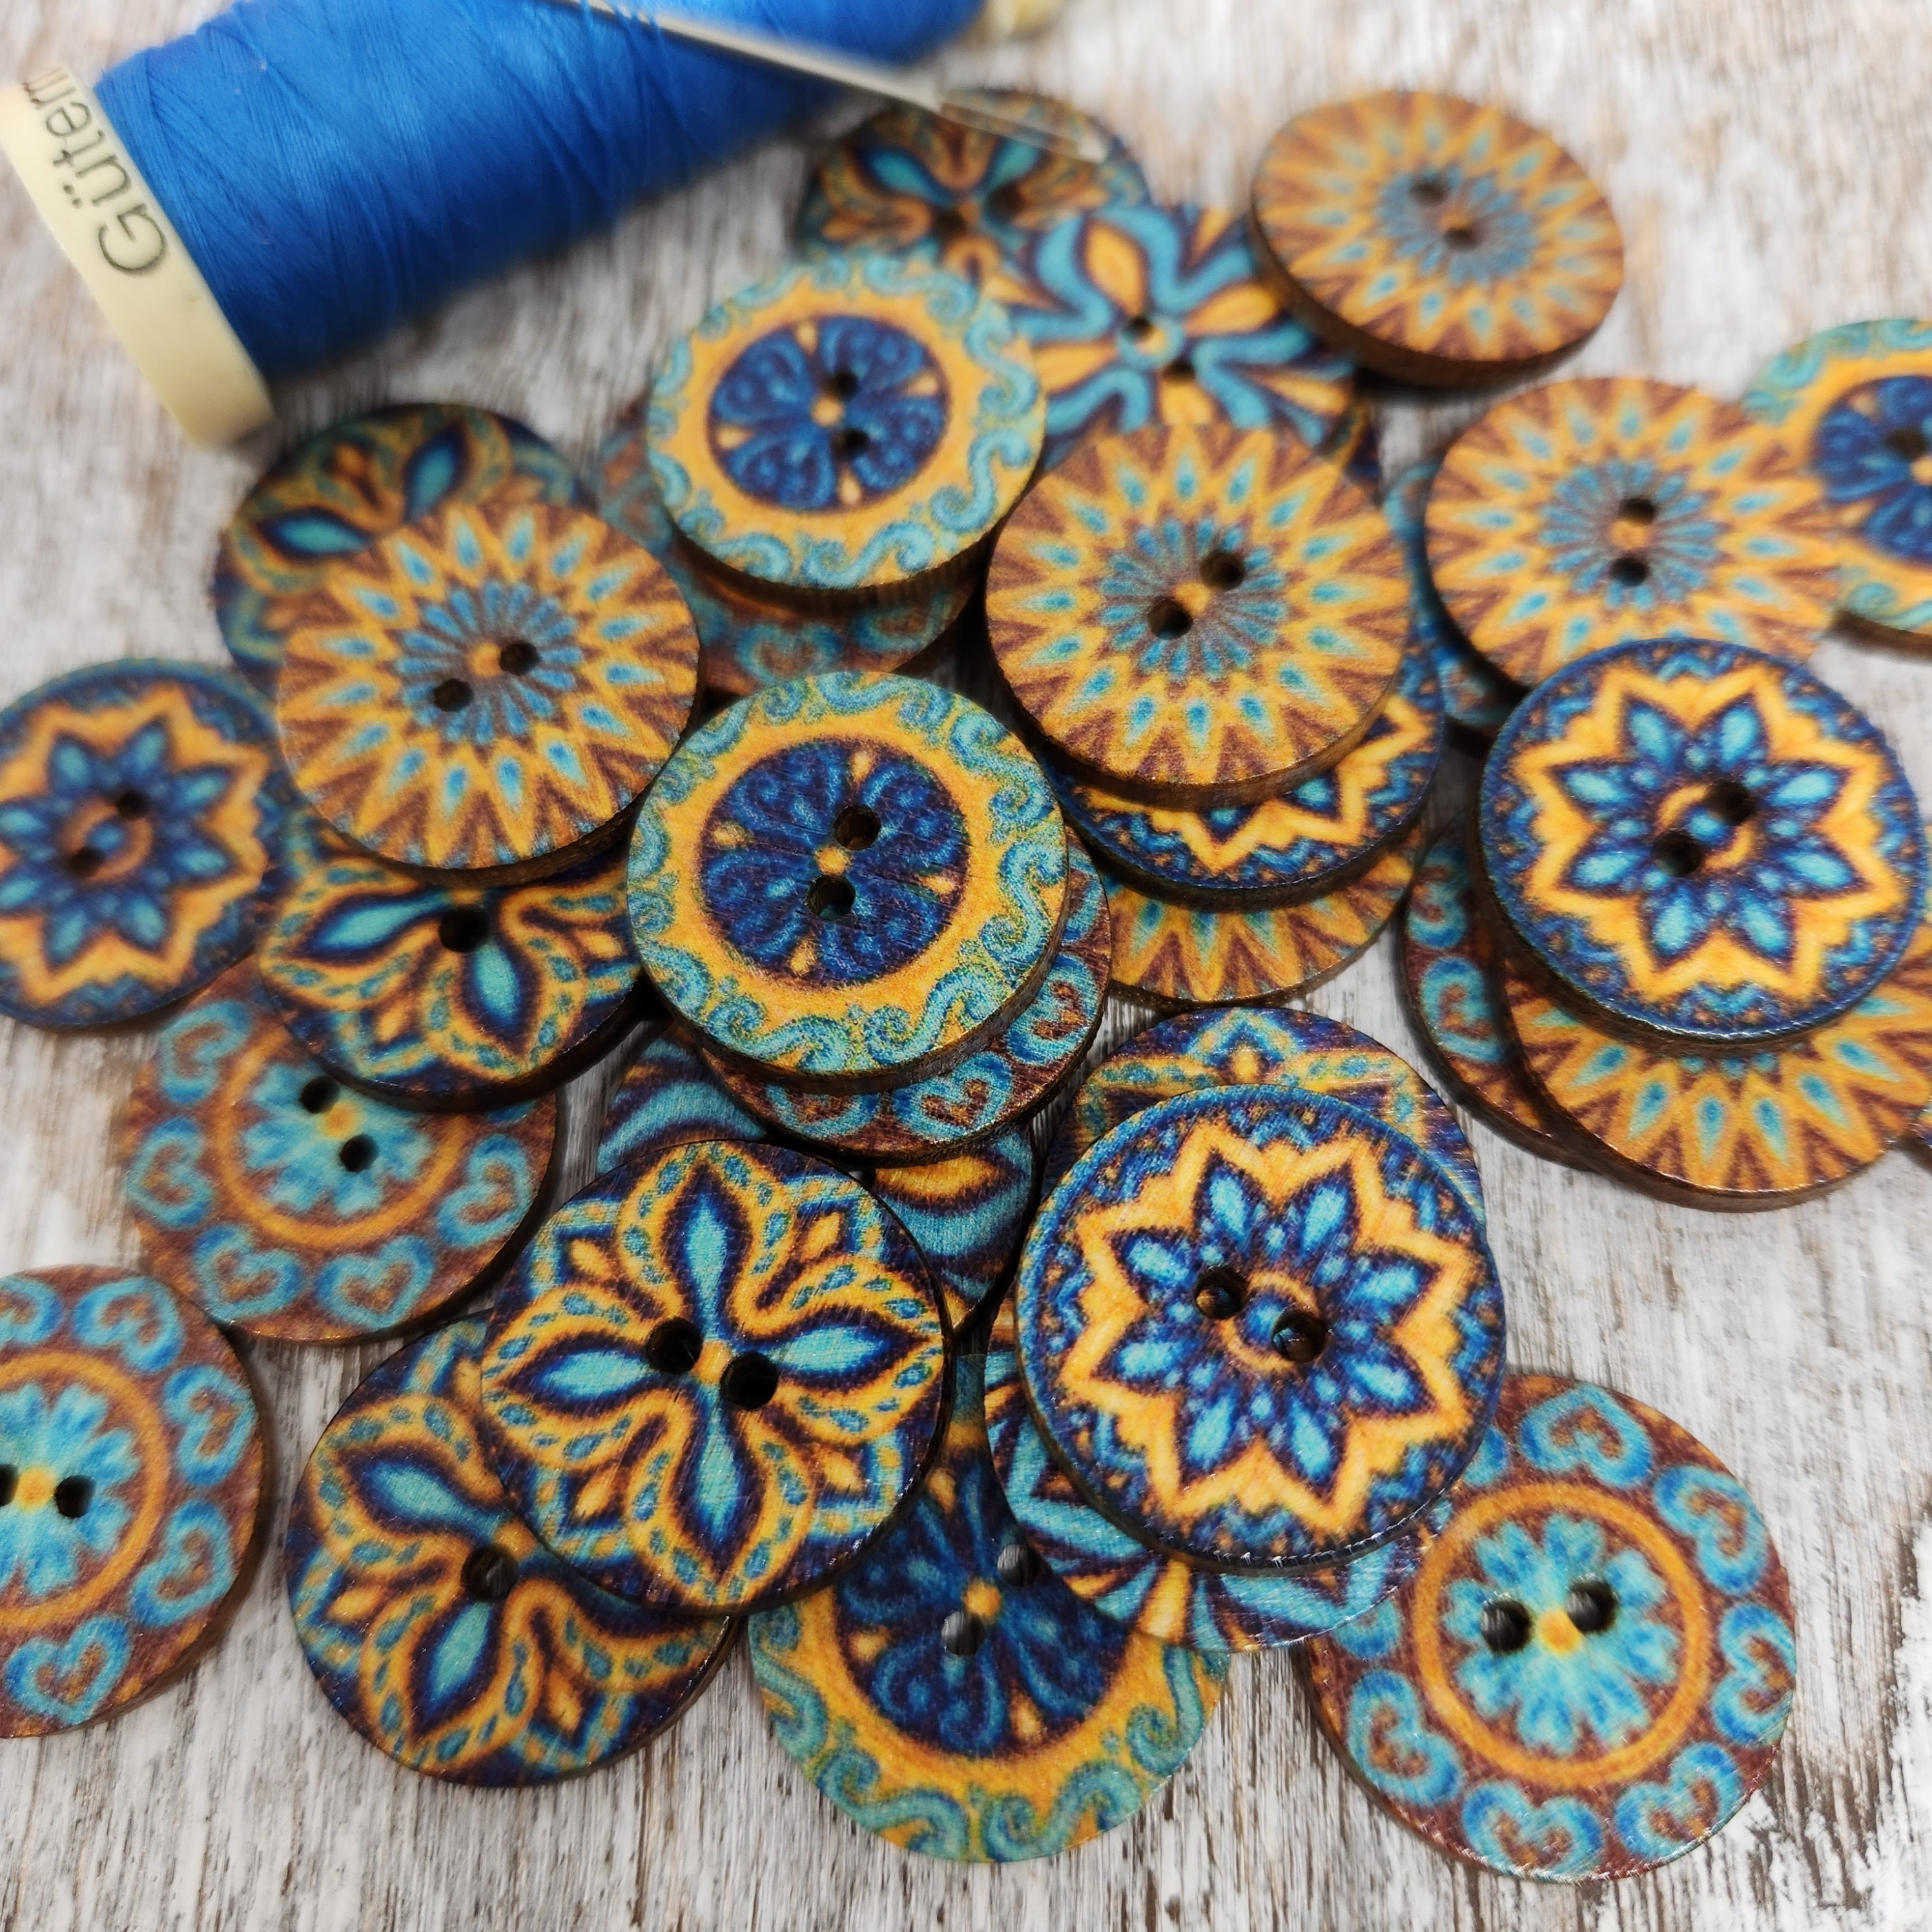 ilauke 1200 pcs Colorful Buttons, Mixed Colors Resin Craft Buttons